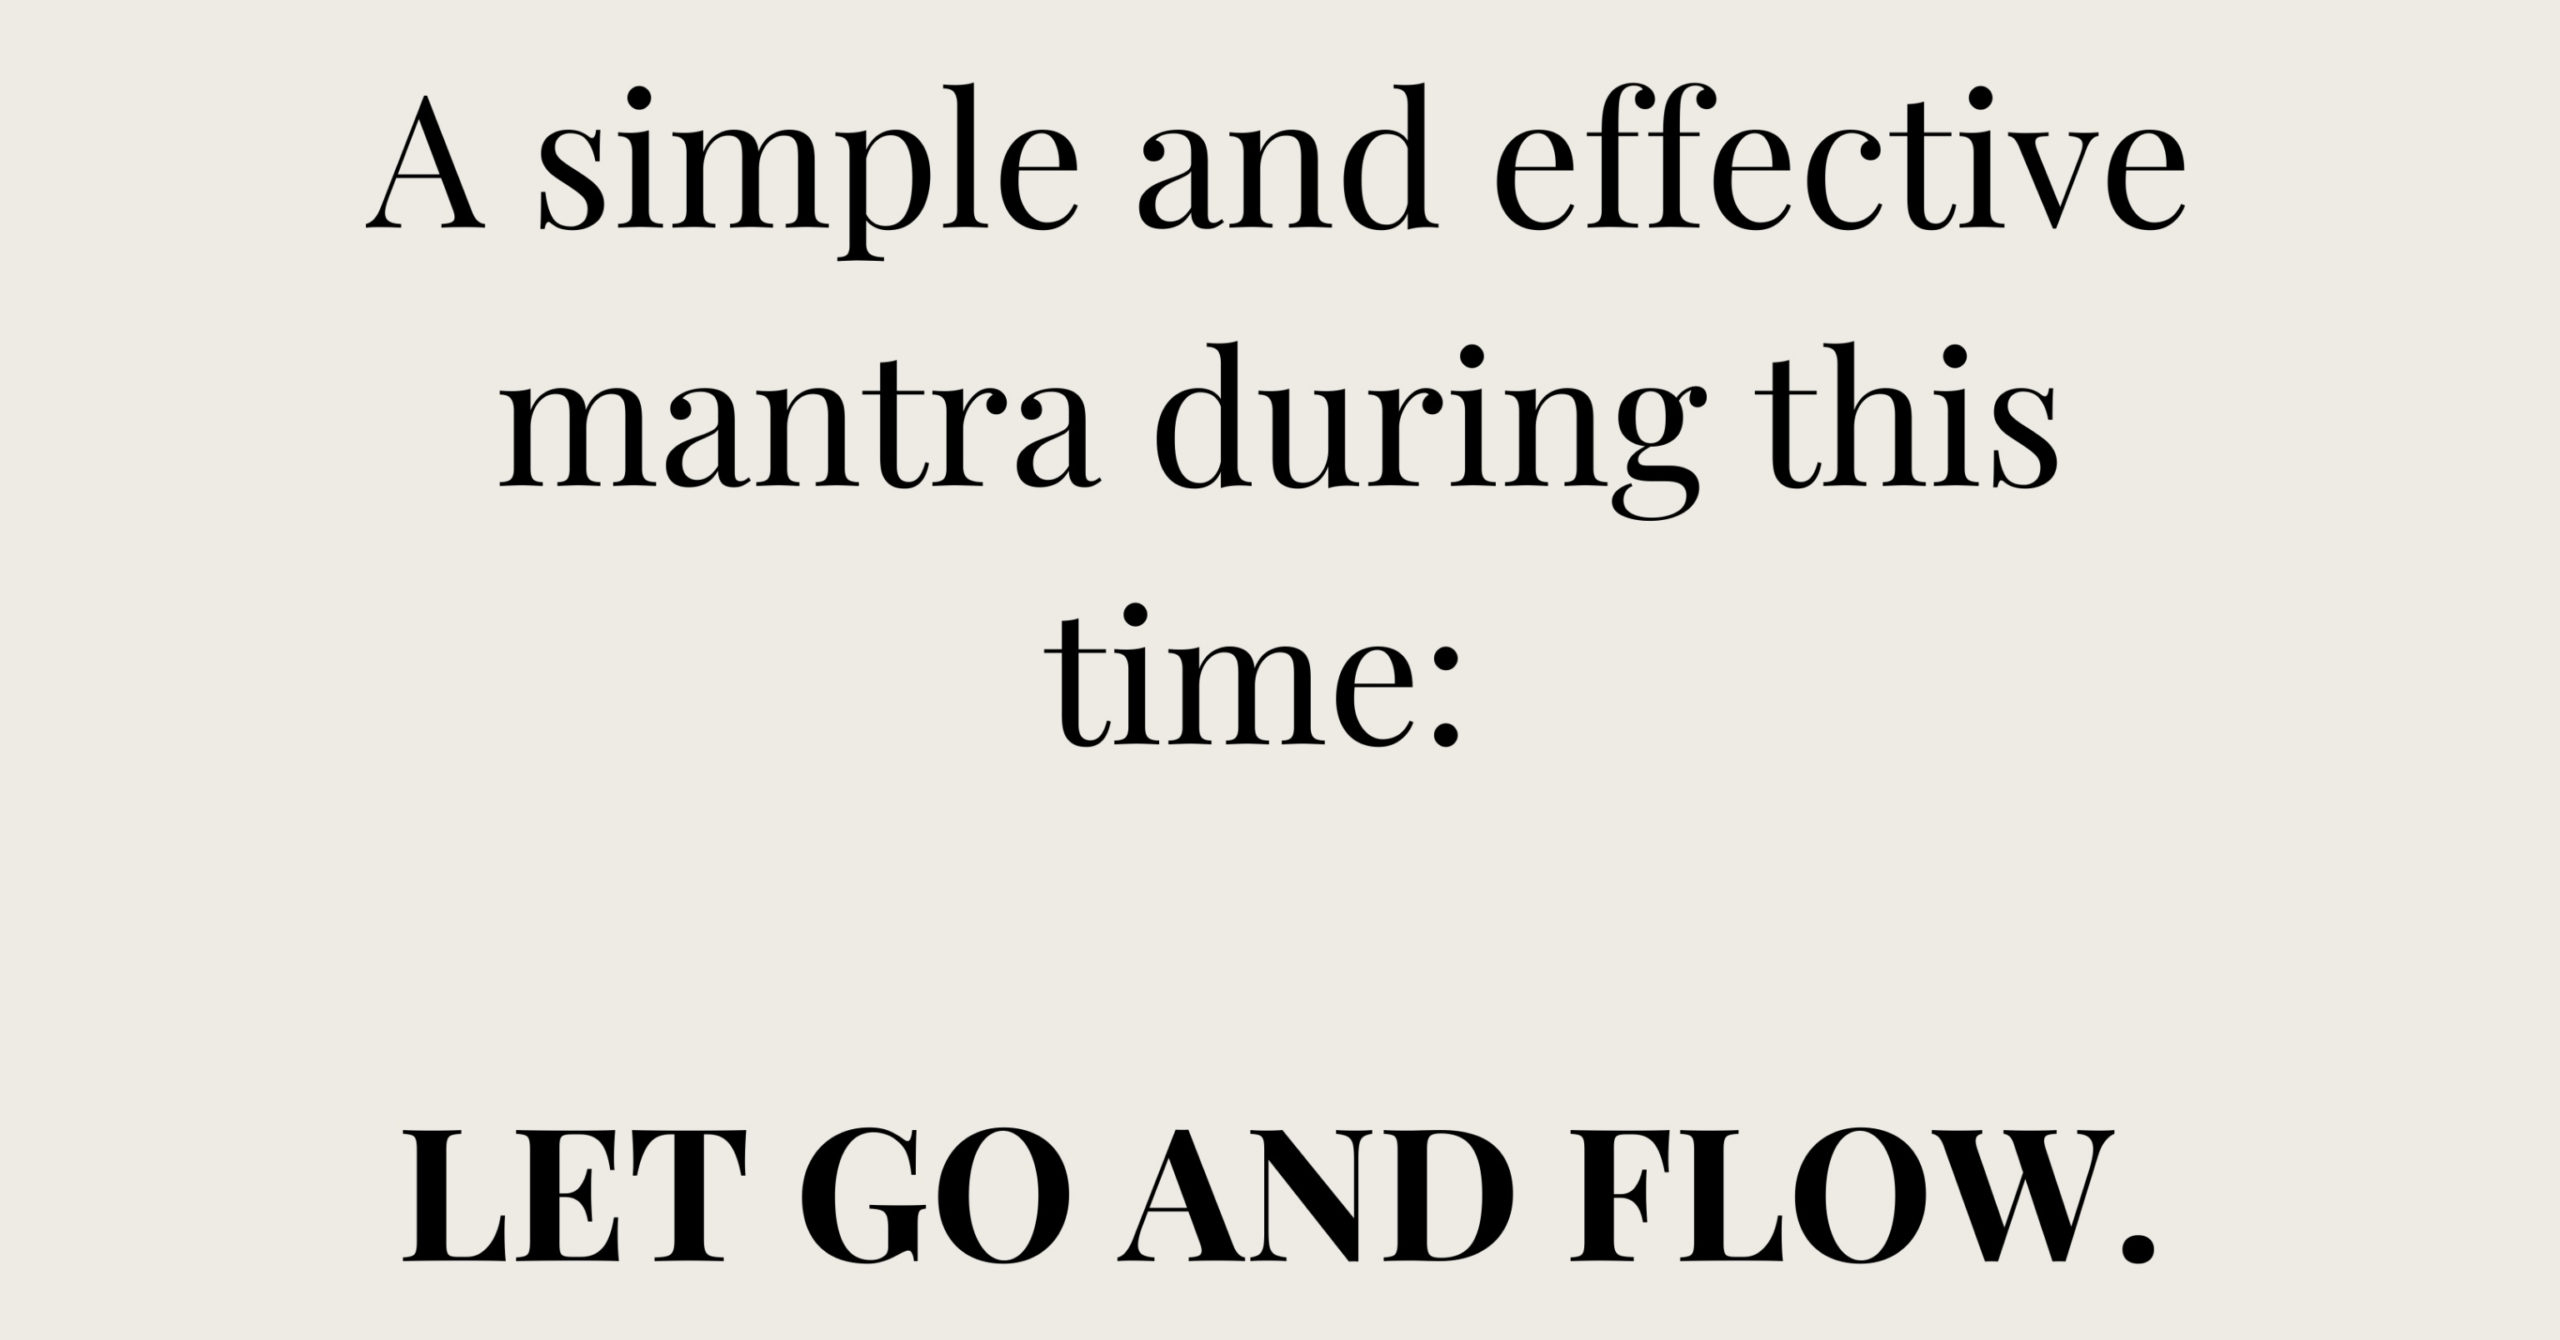 Let Go and Flow